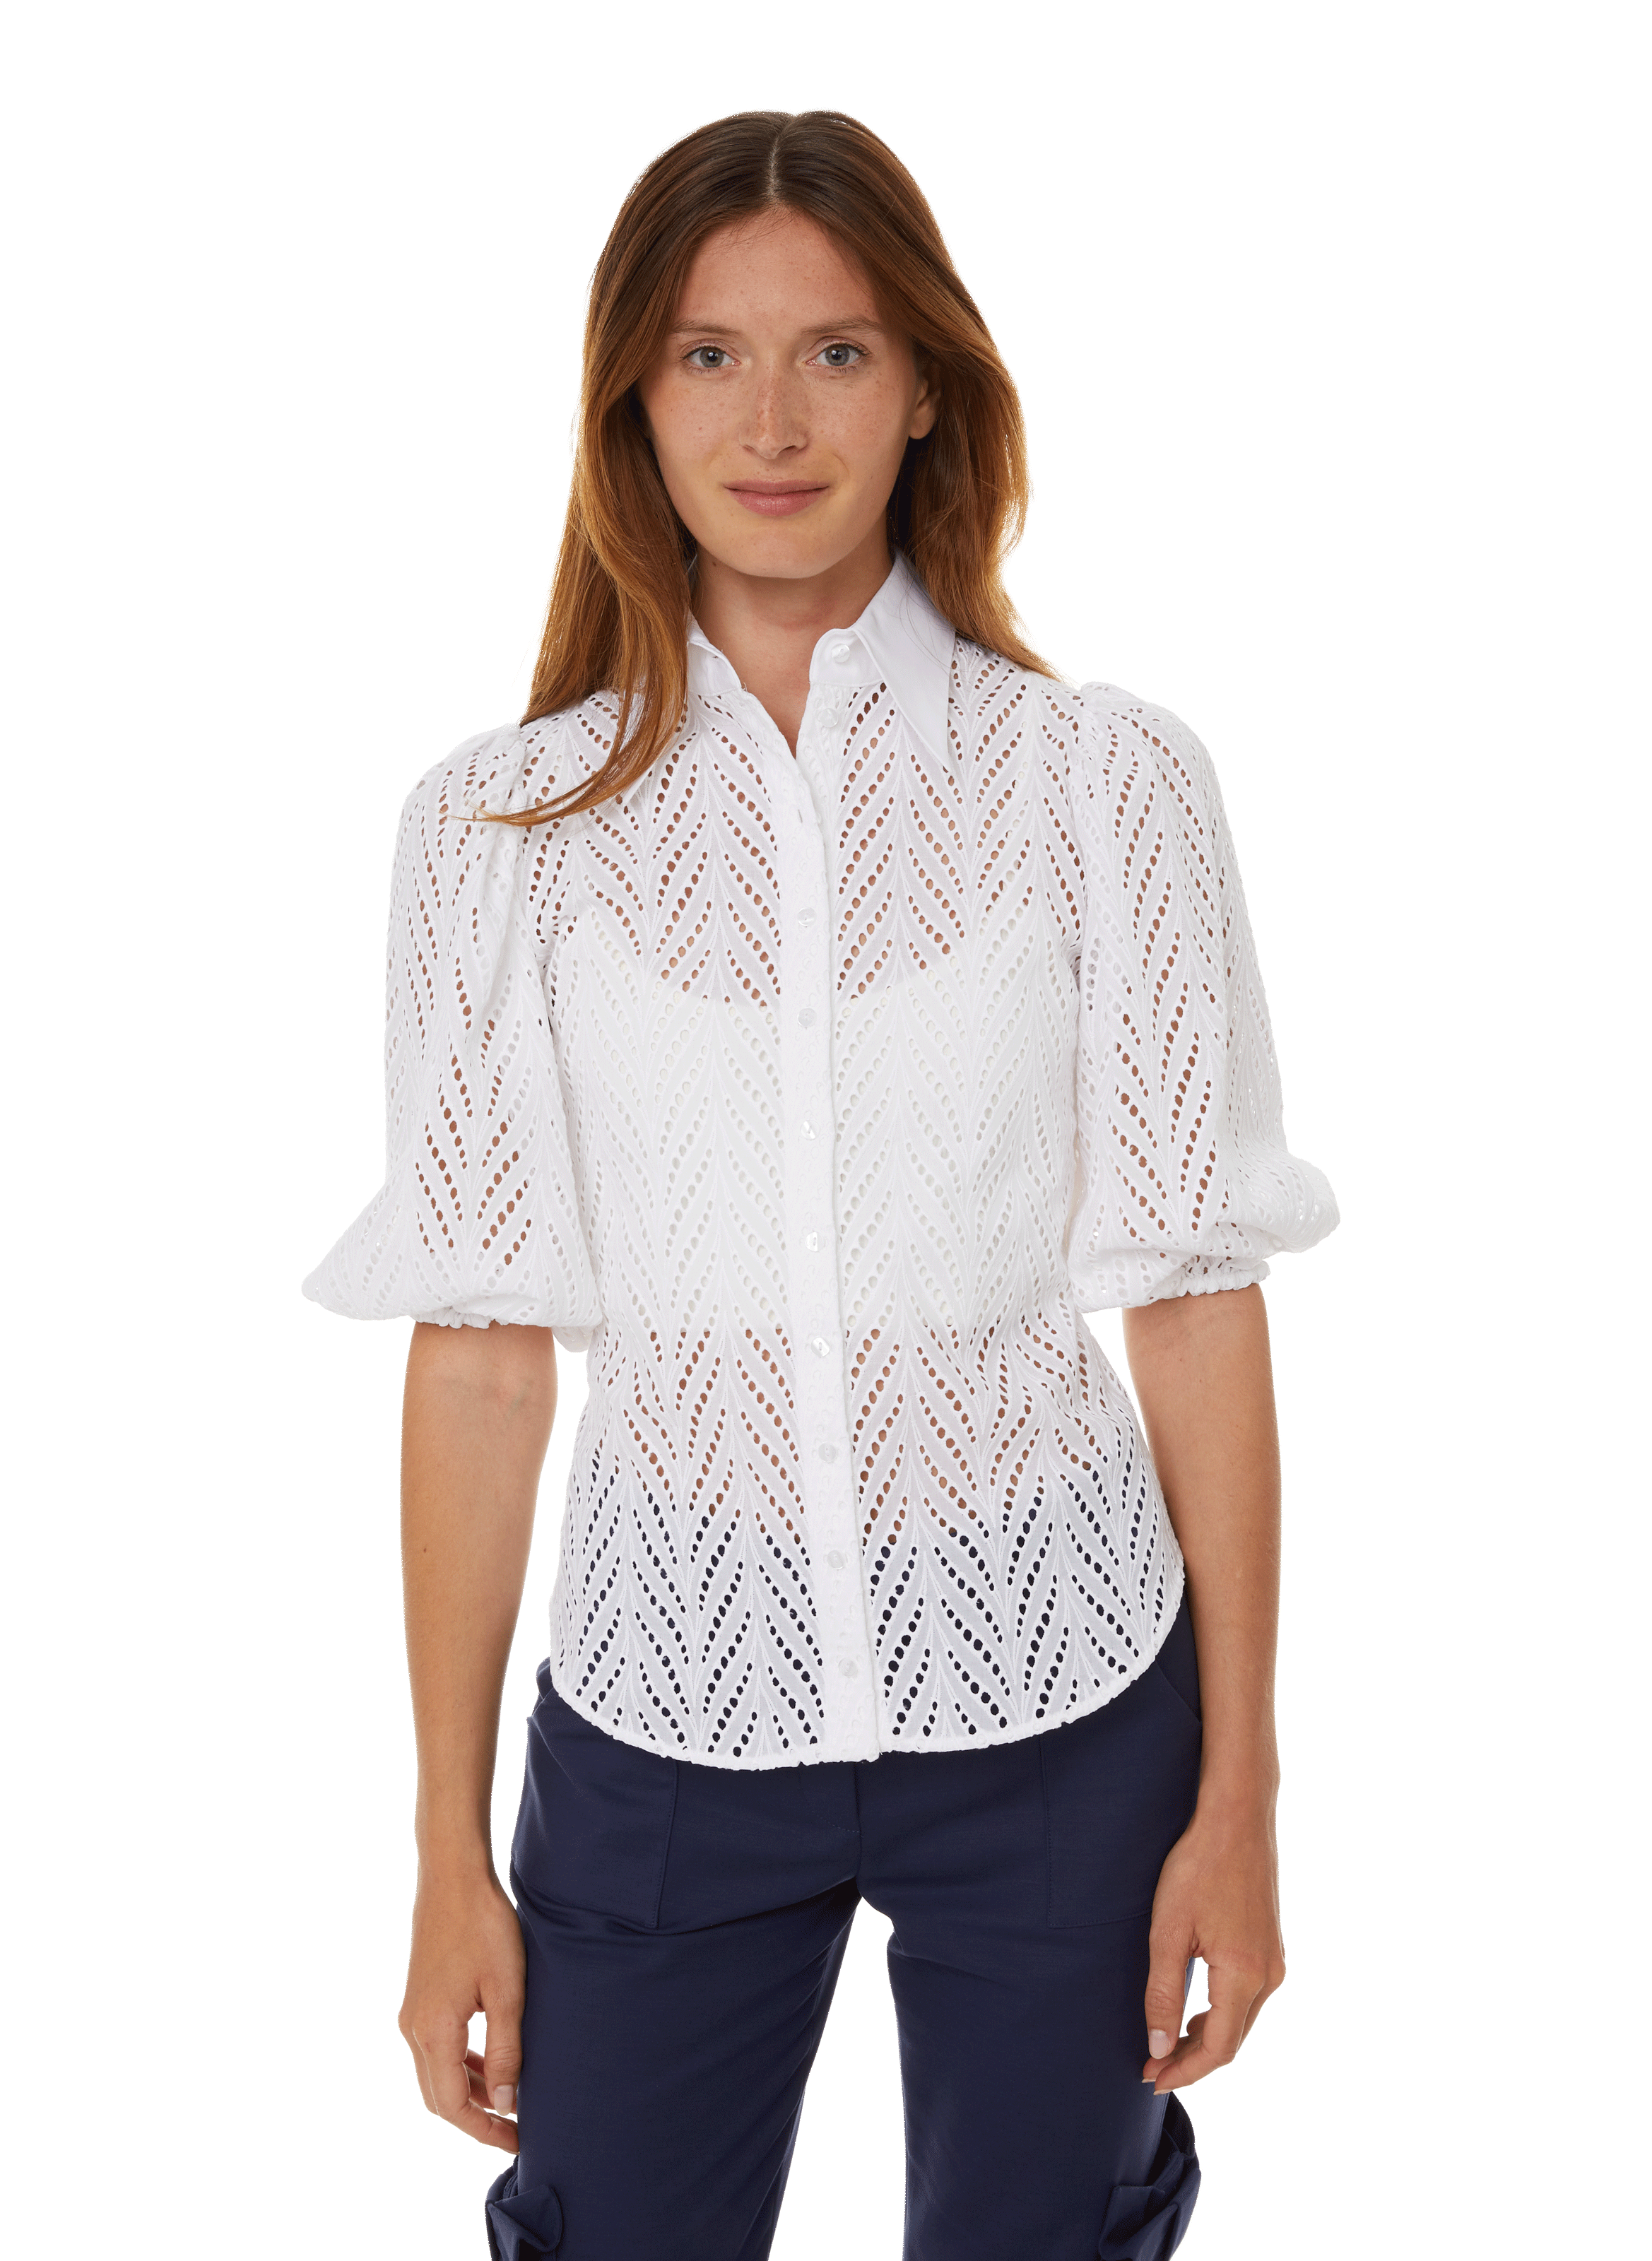 Chemisiers Anne Fontaine Femme Chemisier ANNE FONTAINE 38 rose Femme Vêtements Anne Fontaine Femme Hauts Anne Fontaine Femme Blouses & Chemises  Anne Fontaine Femme Chemisiers Anne Fontaine Femme M, T2 